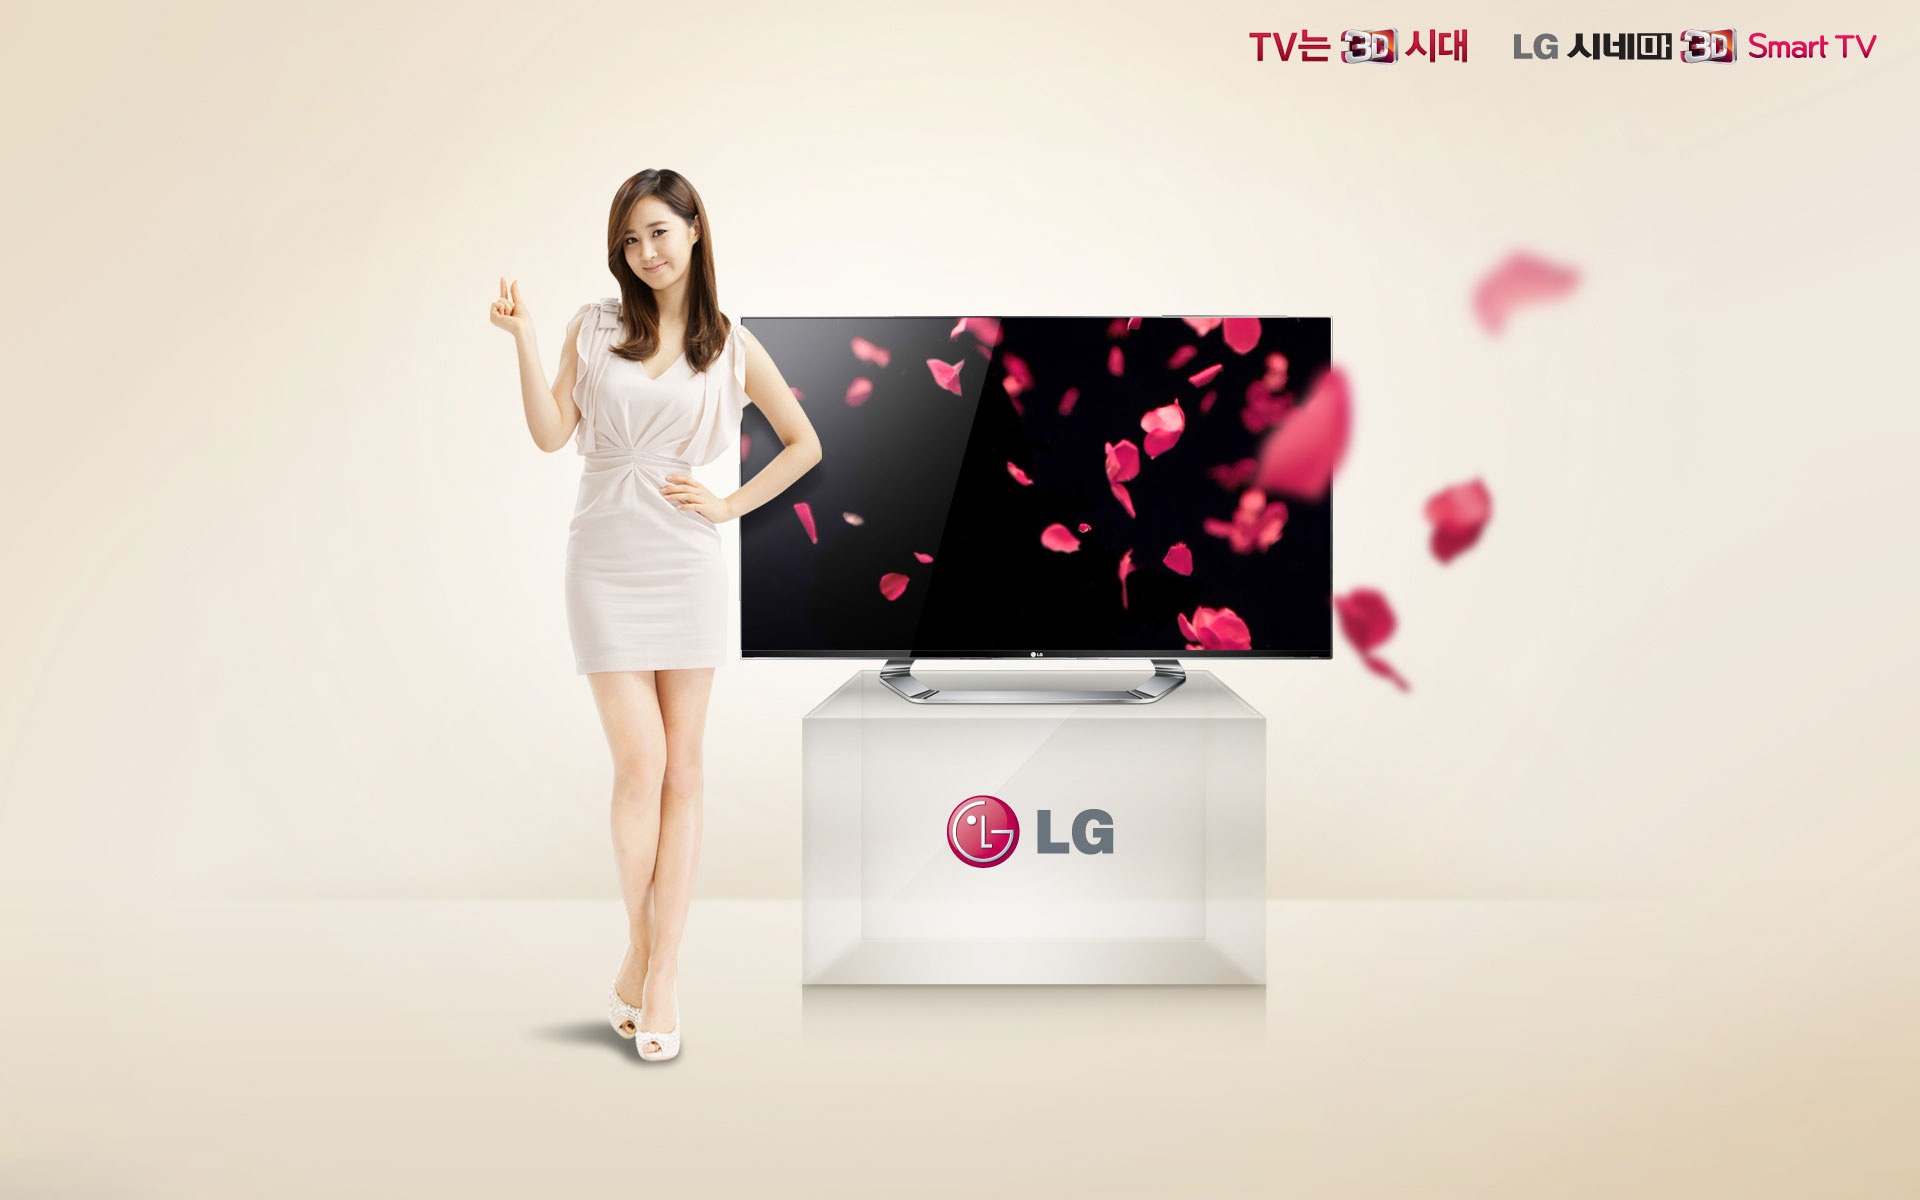 Girls Generation ACE and LG endorsements ads HD wallpapers #17 - 1920x1200